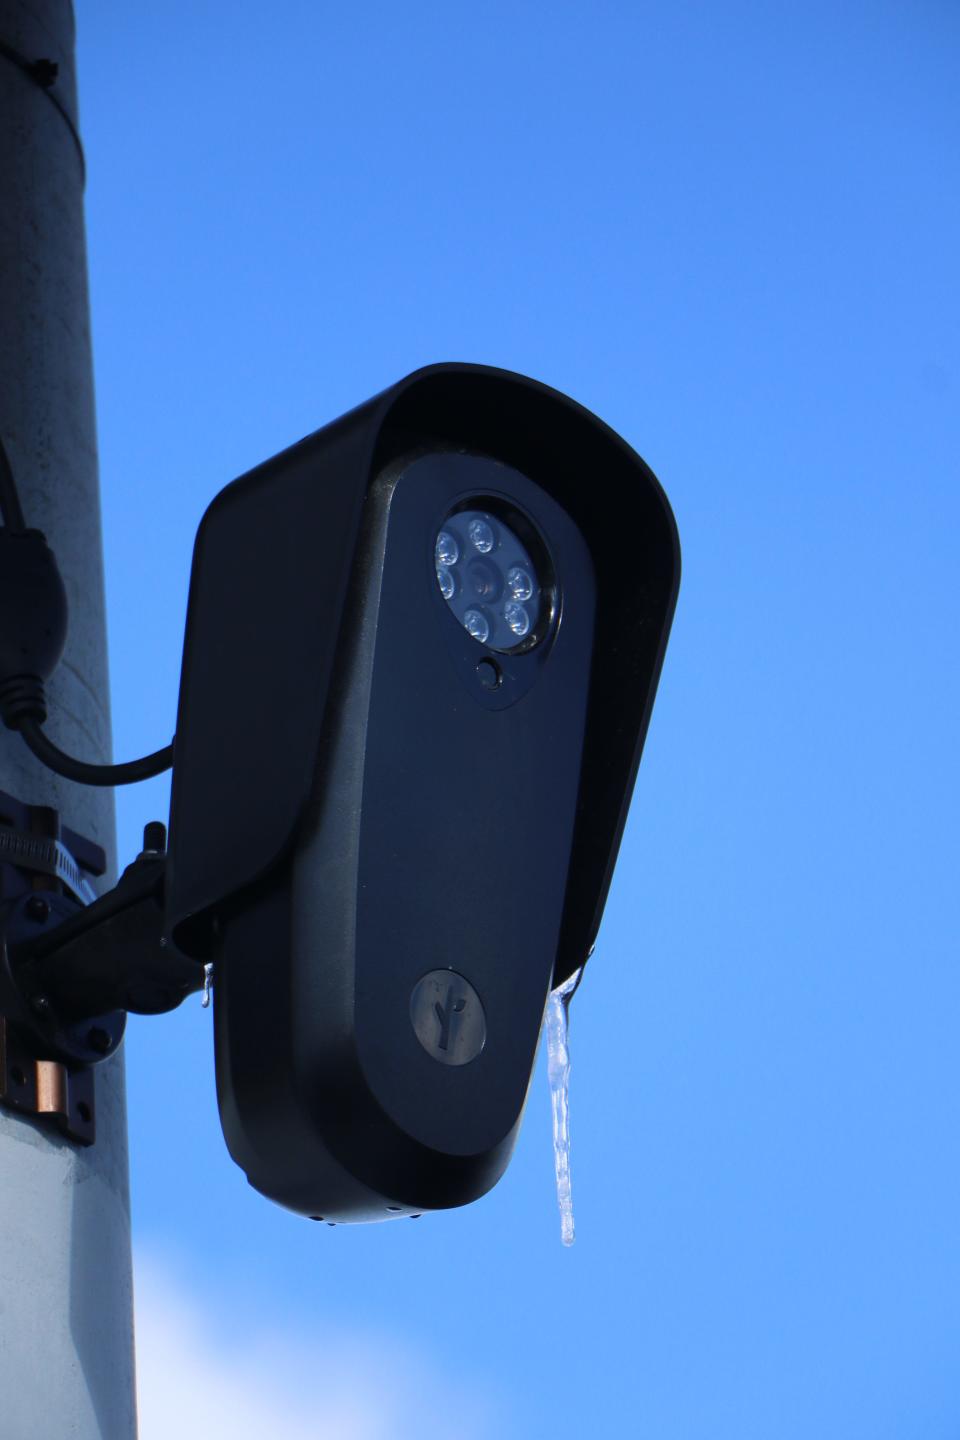 A Flock Safety surveillance camera in Pawtucket, on Broadway at Columbine Avenue, near the Attleboro line.